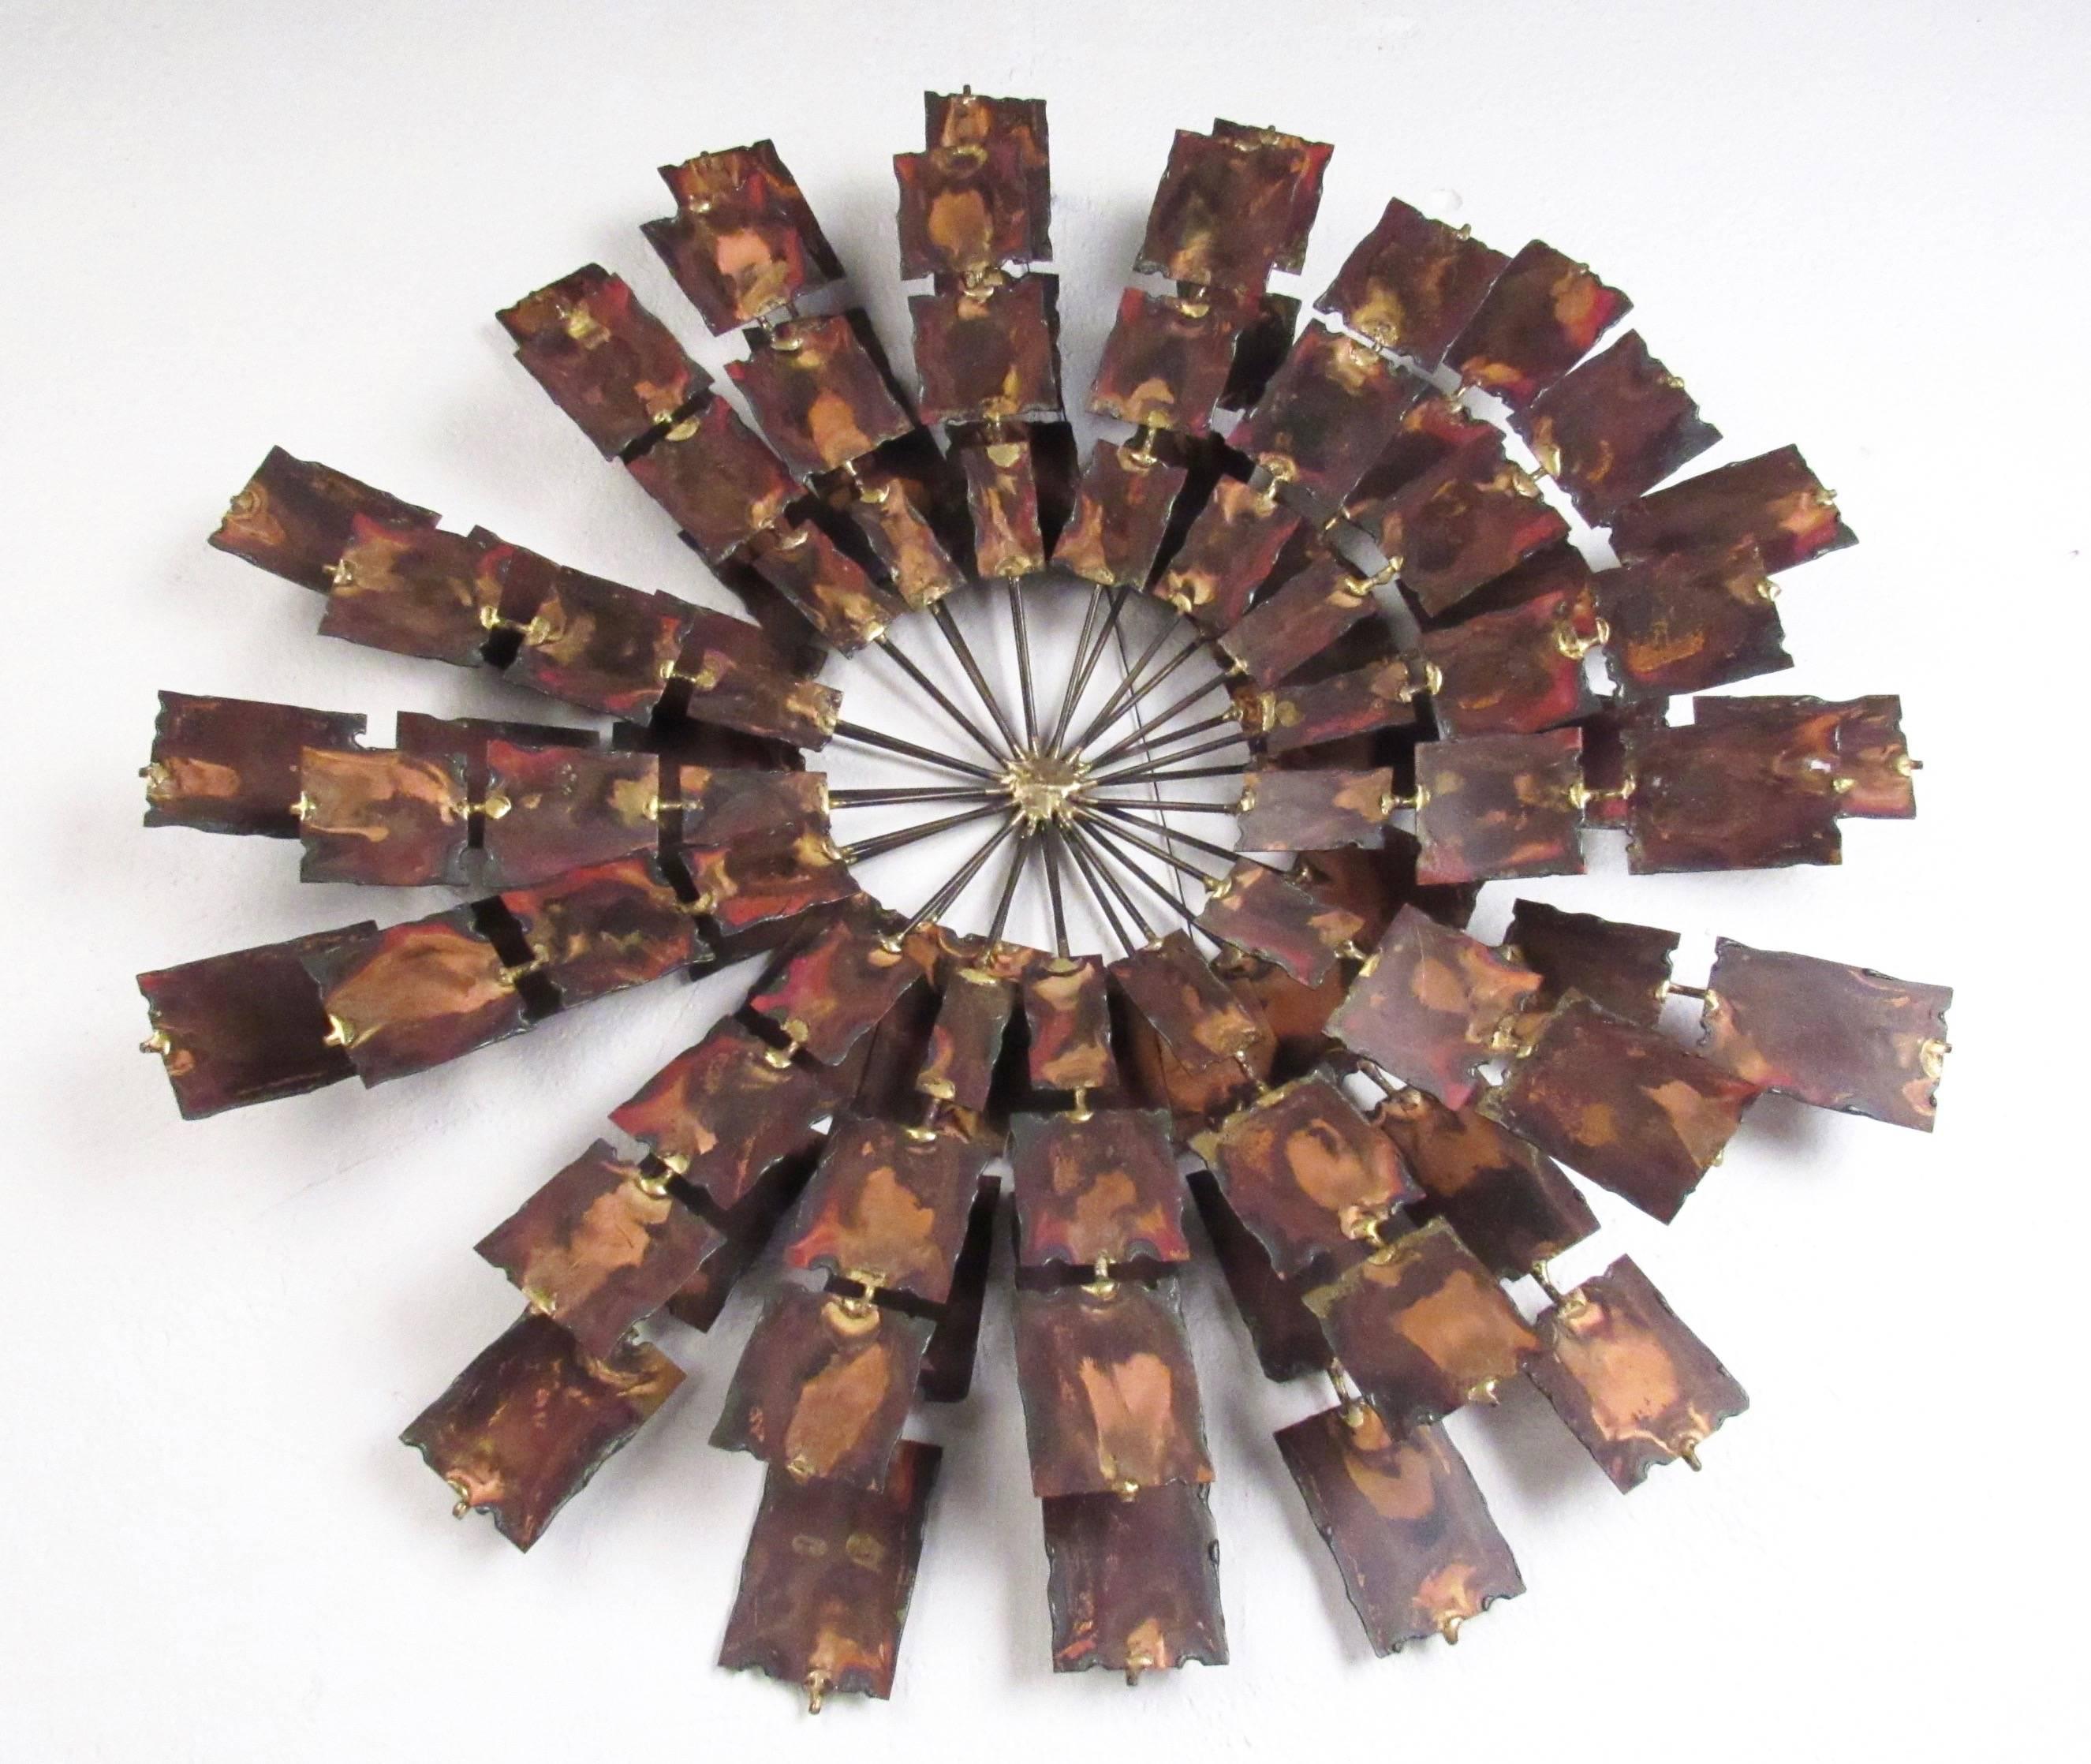 This stylish sunburst style wall art features hammered metal in a circular design after the Mid-Century style of Curtis Jere. Unique mixed metal construction adds to the vintage modern appeal of the piece, impressive wall art for home or business.